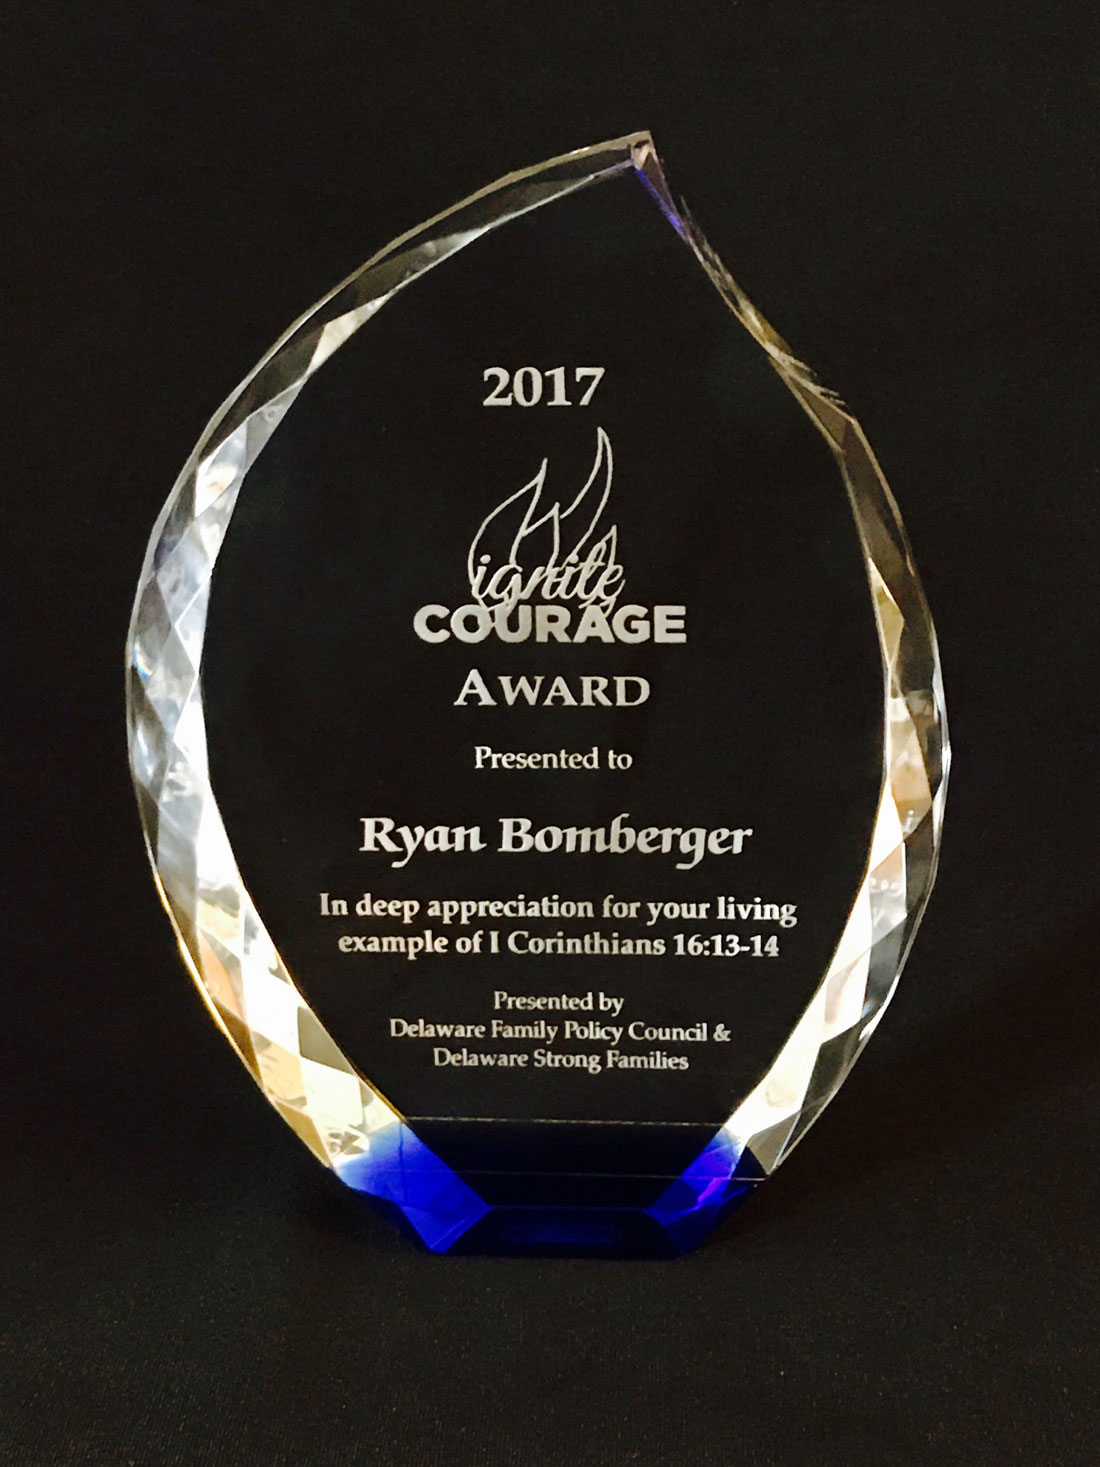 Delaware Family Policy Council gives Ryan Bomberger the 'Ignite Courage Award'